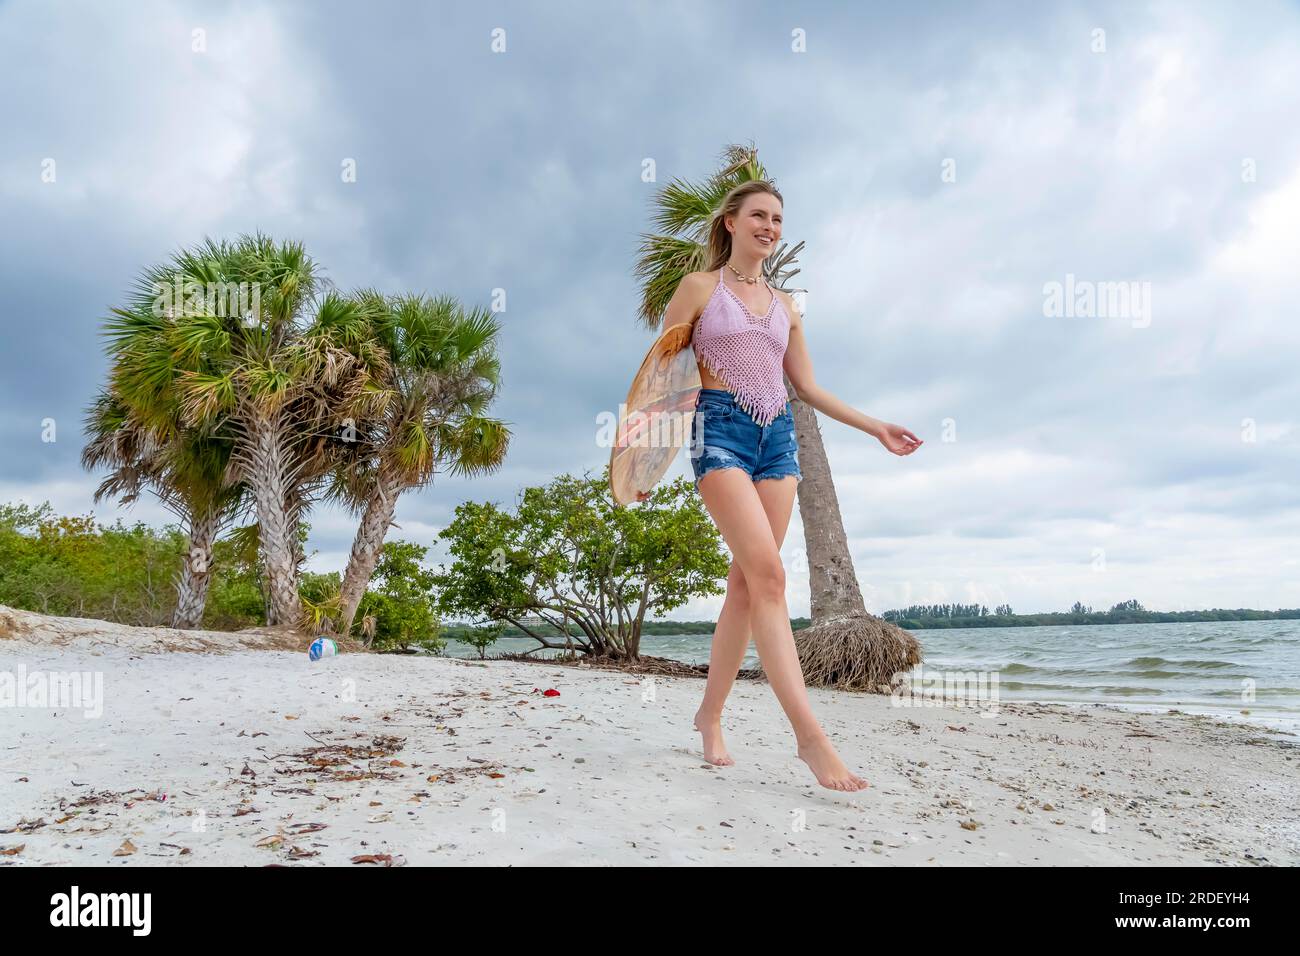 A beautiful blonde model enjoys a summers day while preparing to surf on the ocean with her boogie board Stock Photo